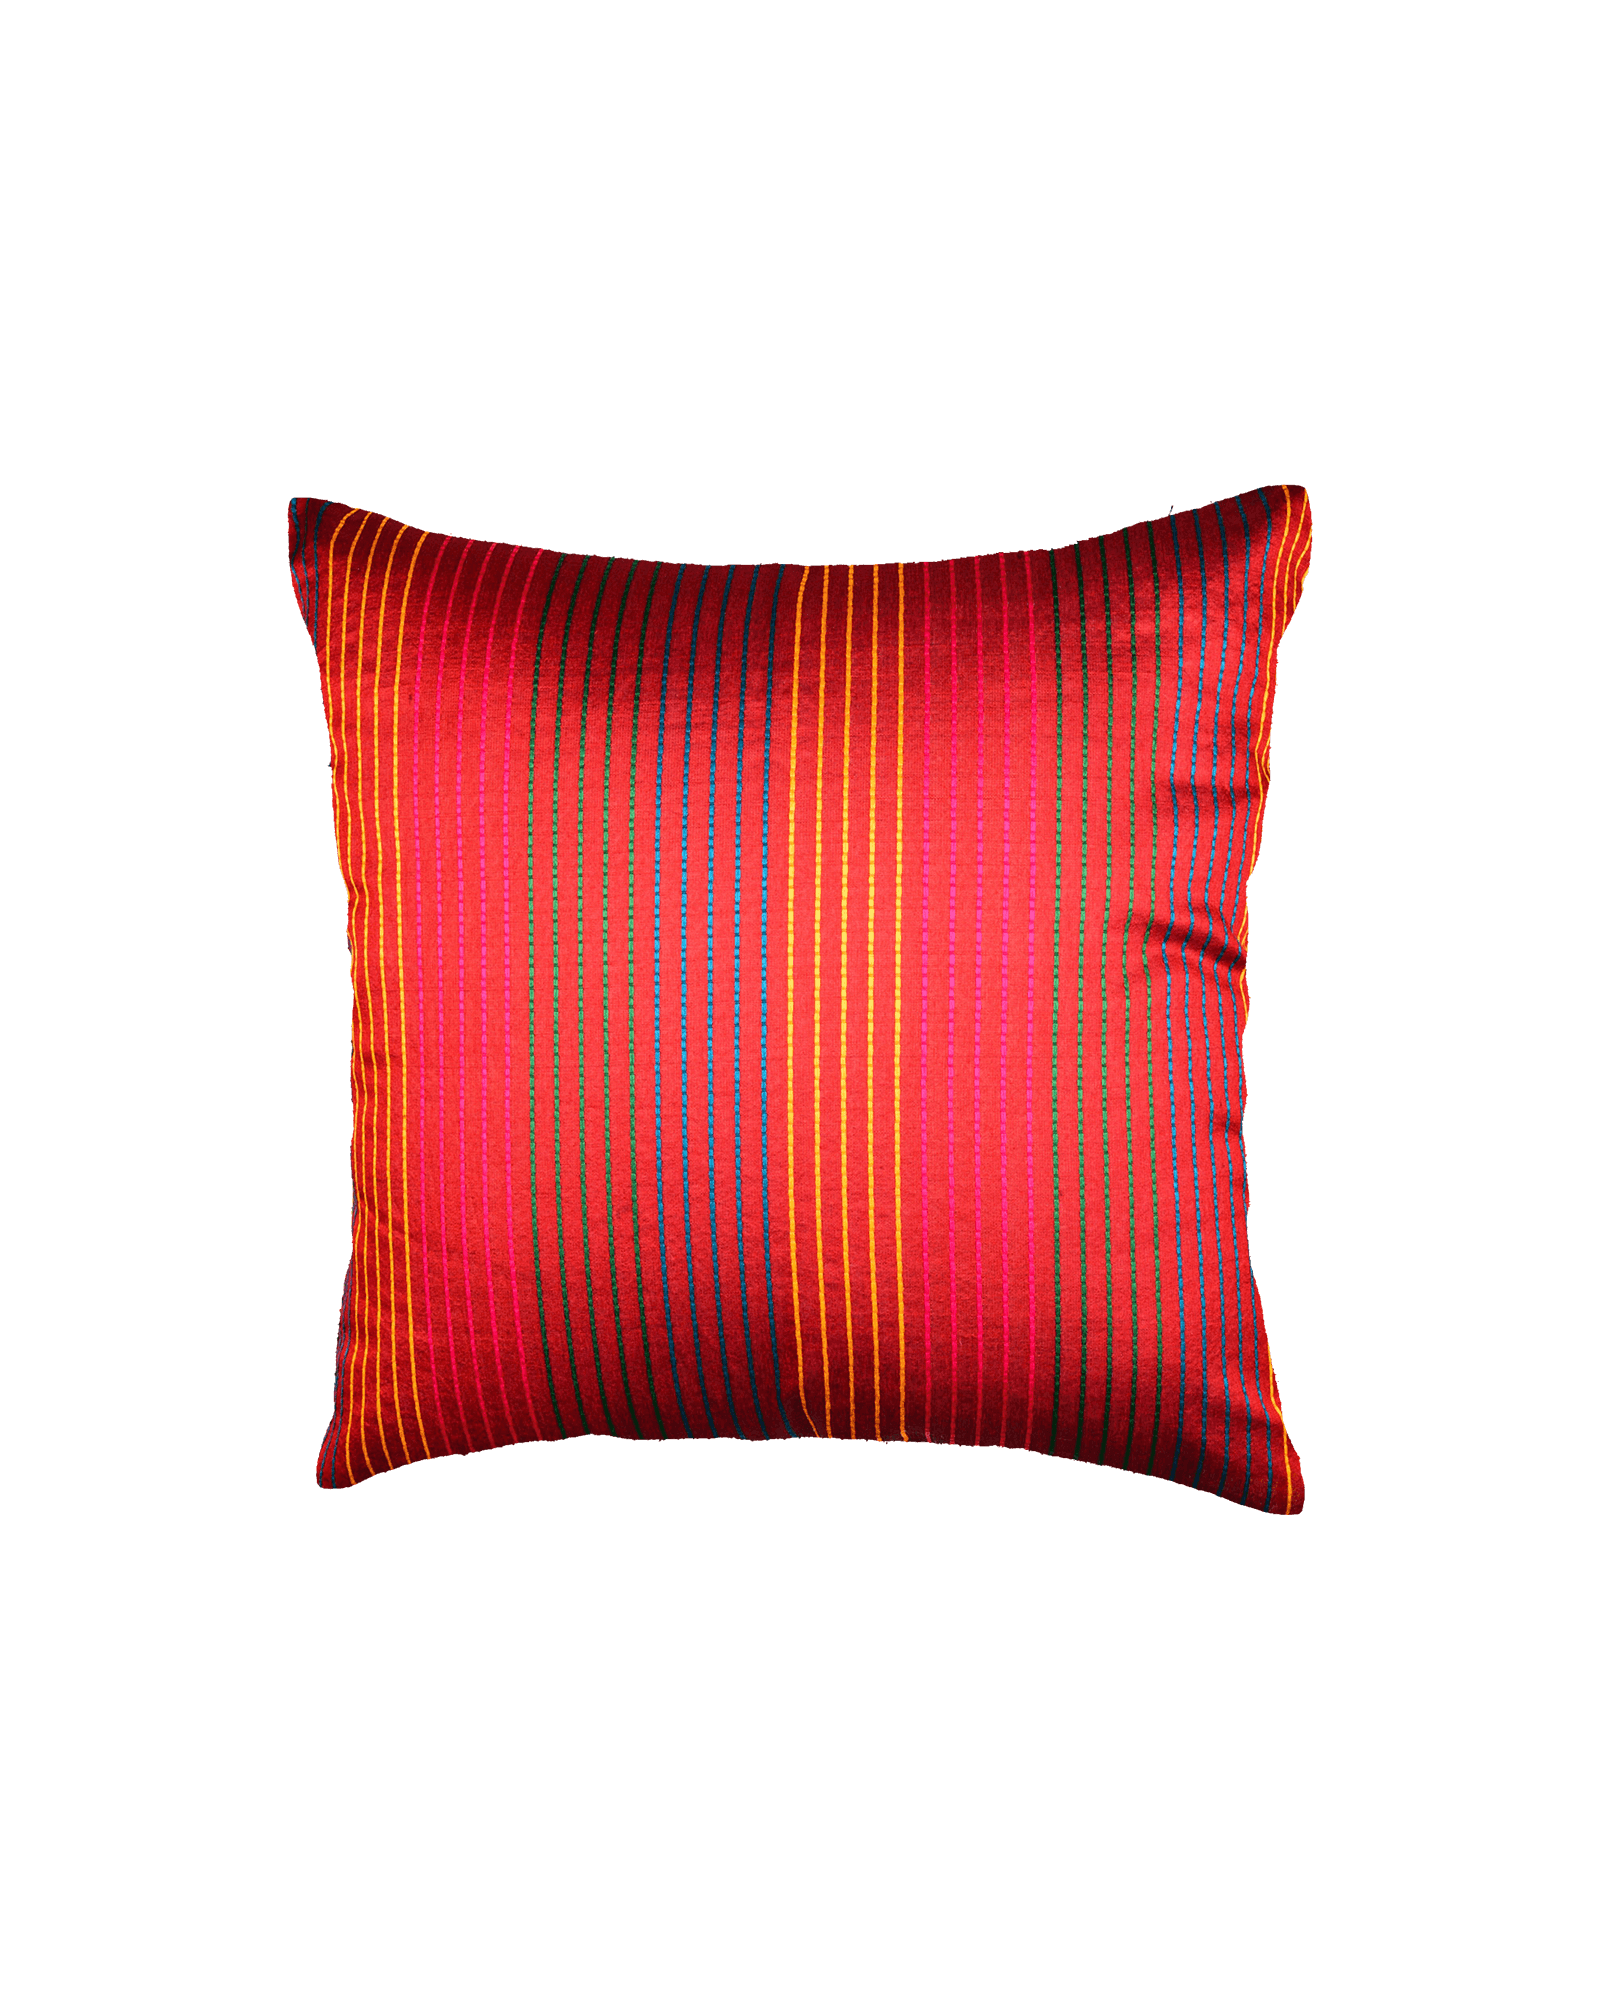 Red Banarasi Multi-color Stripes Poly Silk Cushion Cover 16" - By HolyWeaves, Benares